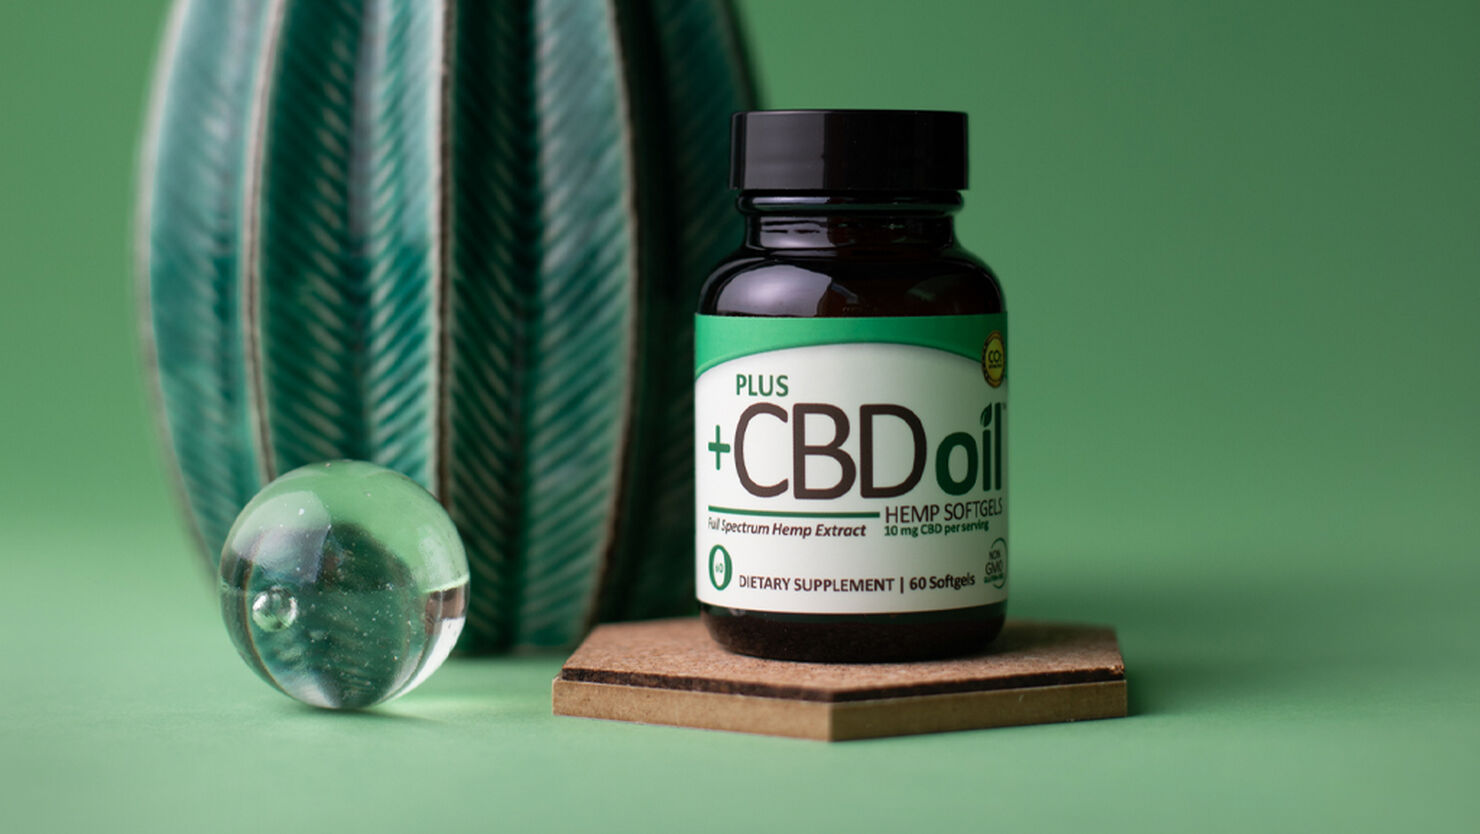 Hemp: A Safe and Reliable Source of CBD Oil